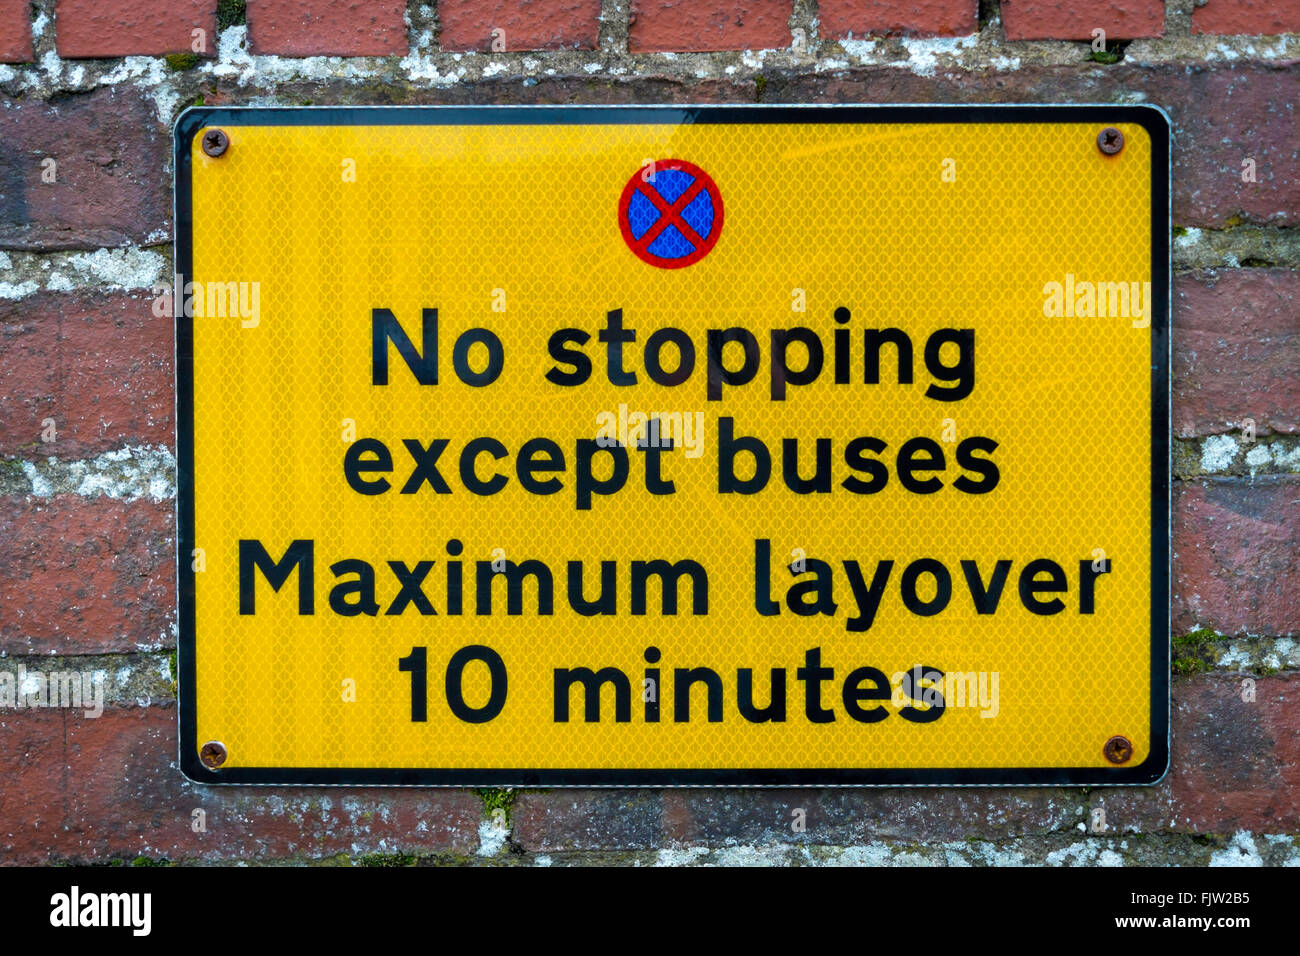 Bus Stop Restriction Sign notice No Stopping except buses maximum layover 10 minutes Stock Photo